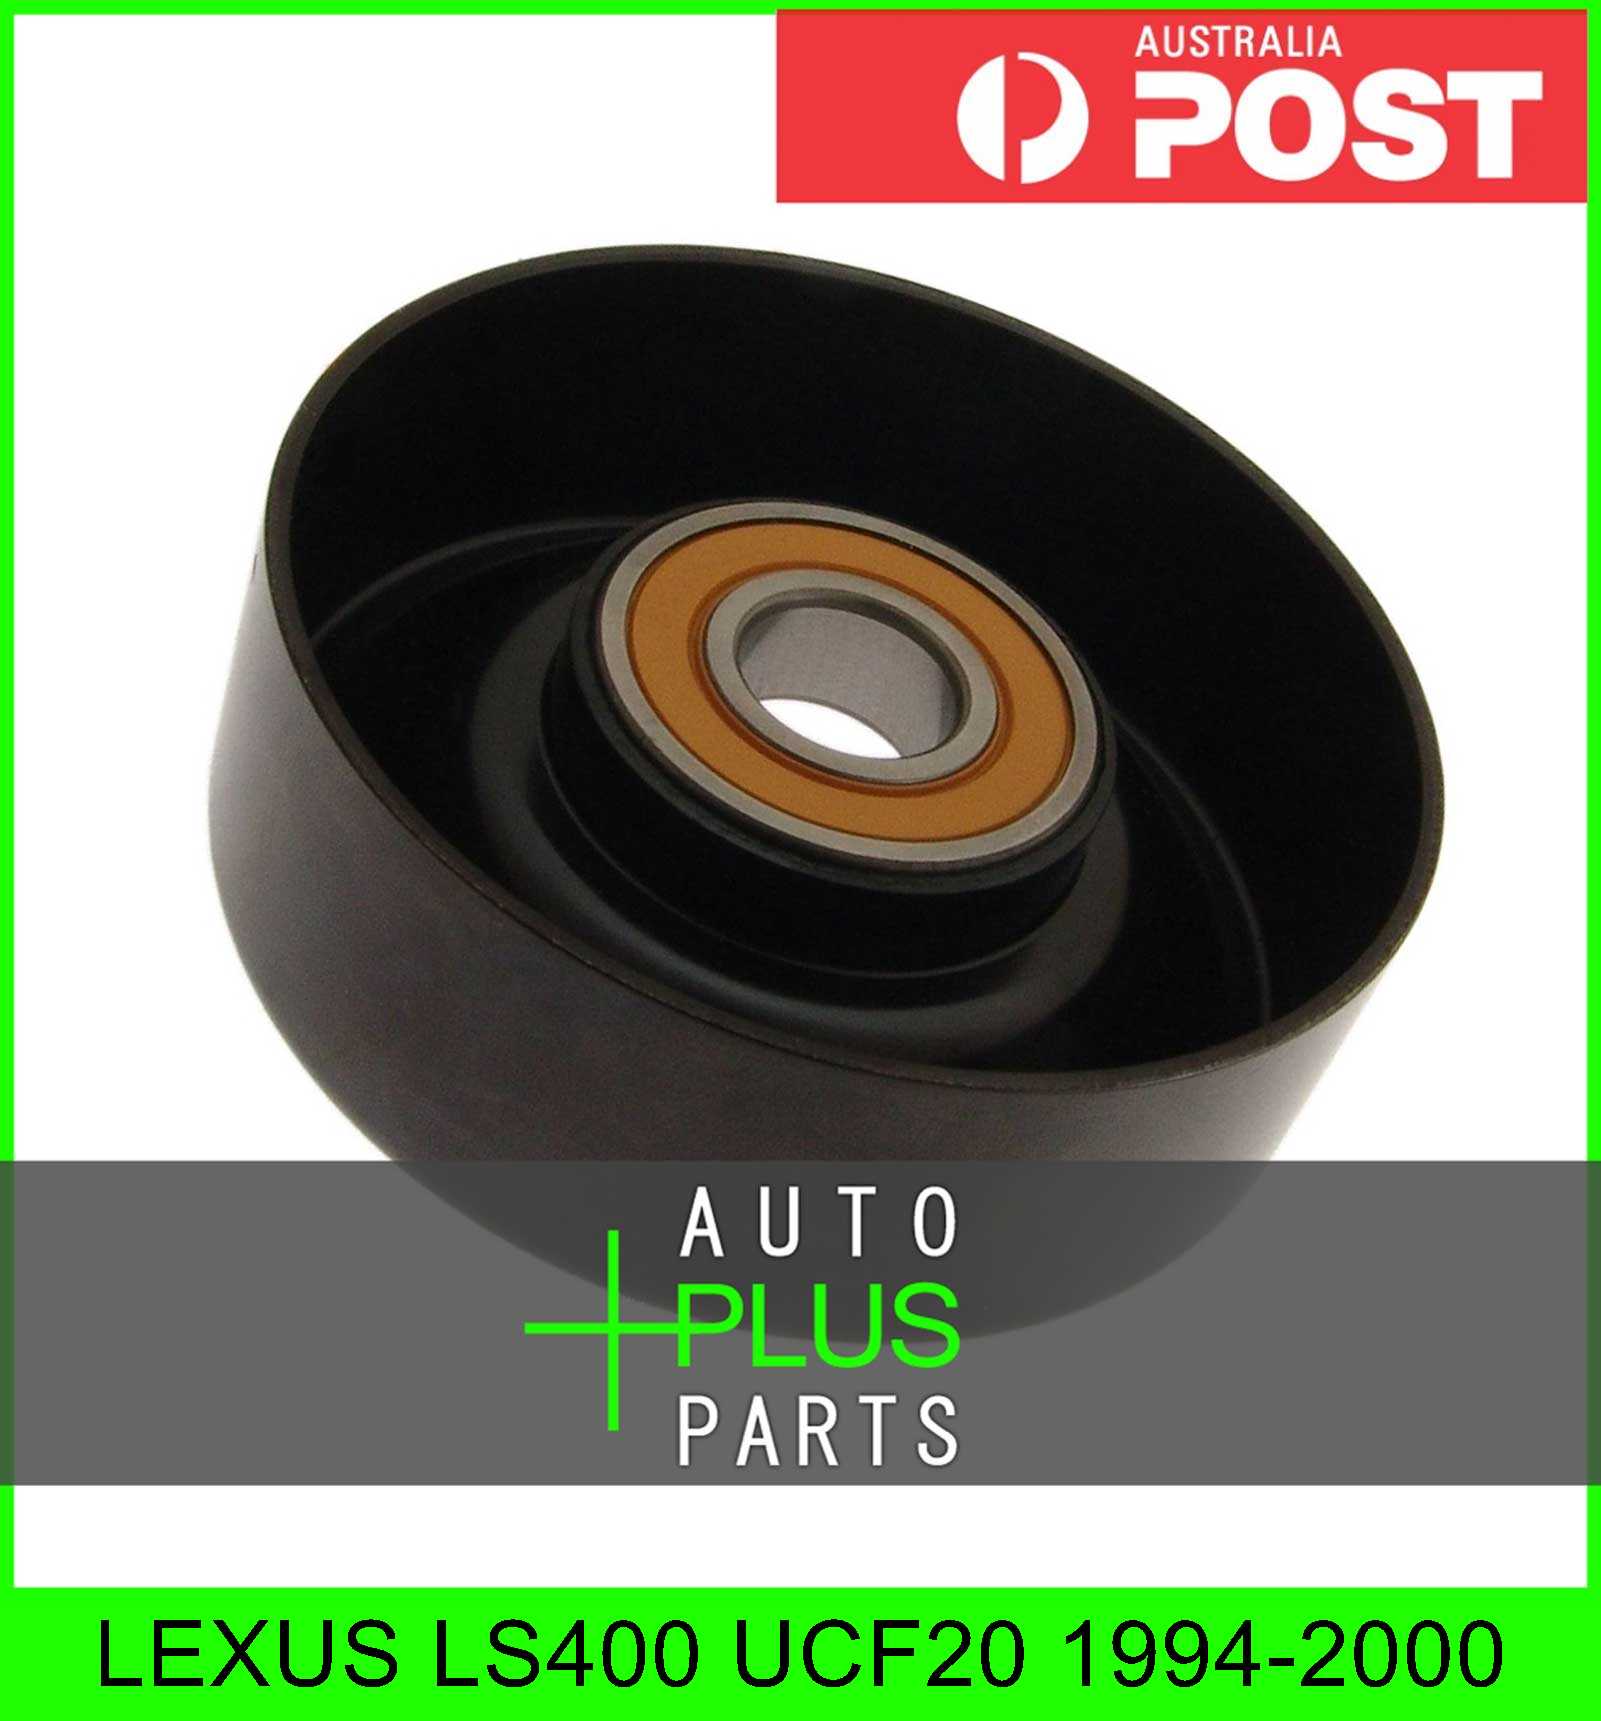 Fits LEXUS LS400 UCF20 Idler Tensioner Drive Belt Bearing Pulley Product Photo